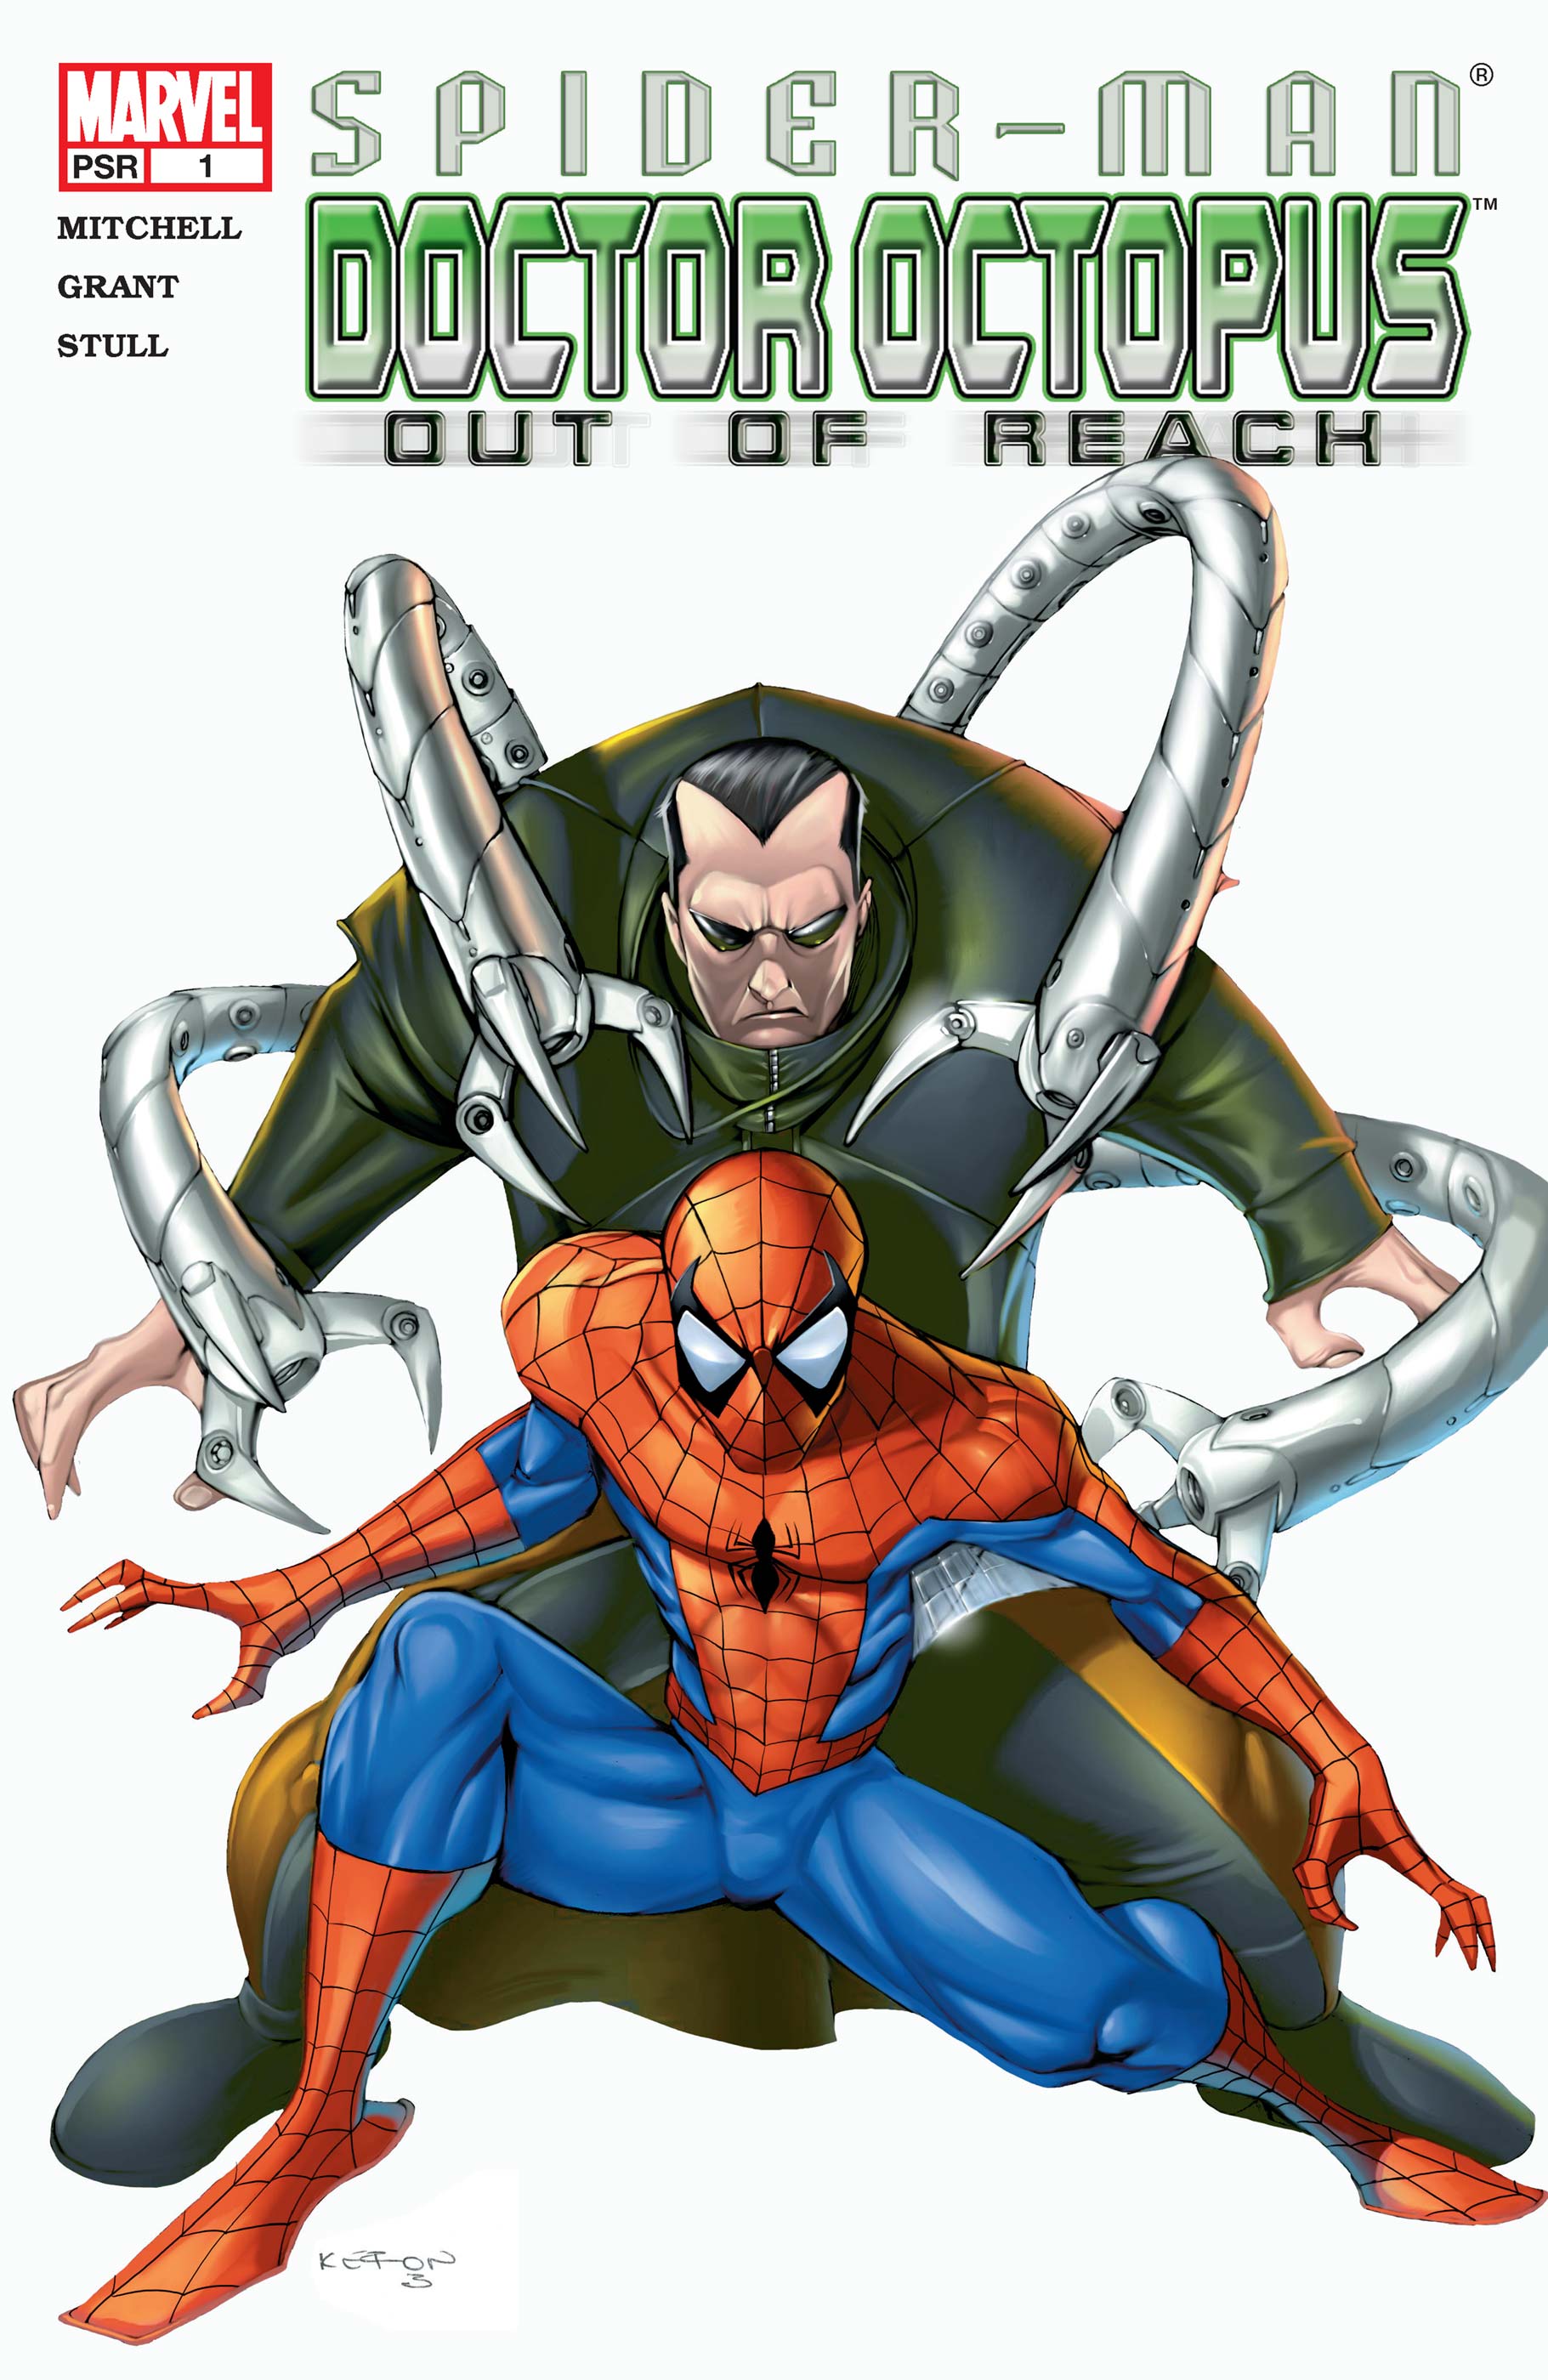 SPIDER-MAN/DOCTOR OCTOPUS. OUT OF REACH #1#2#3#4#5 - MARVEL COMICS (2004)